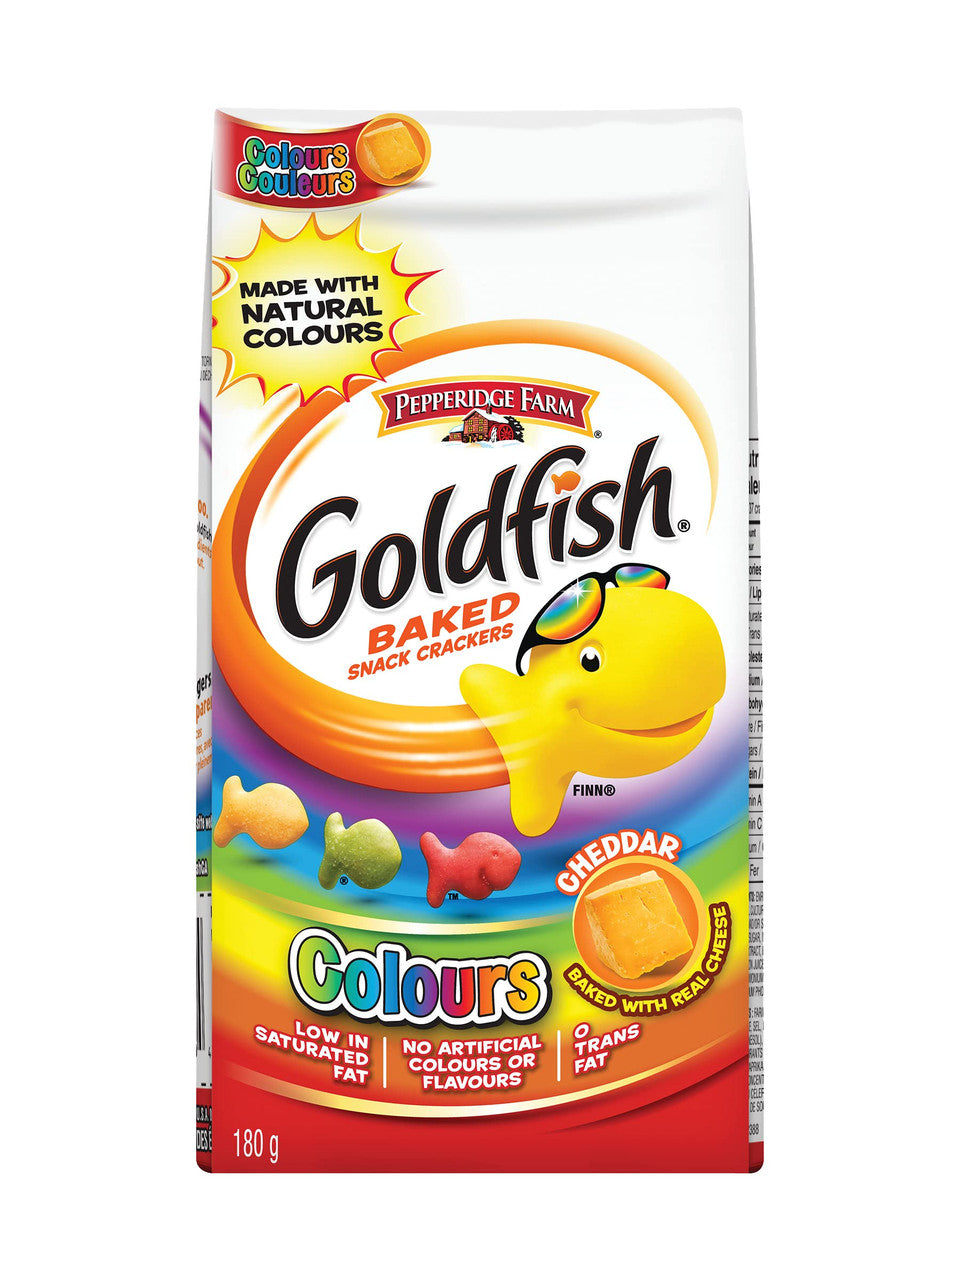 Pepperidge Farm Goldfish Crackers Colours 180g/6.3 oz, (Imported from Canada)